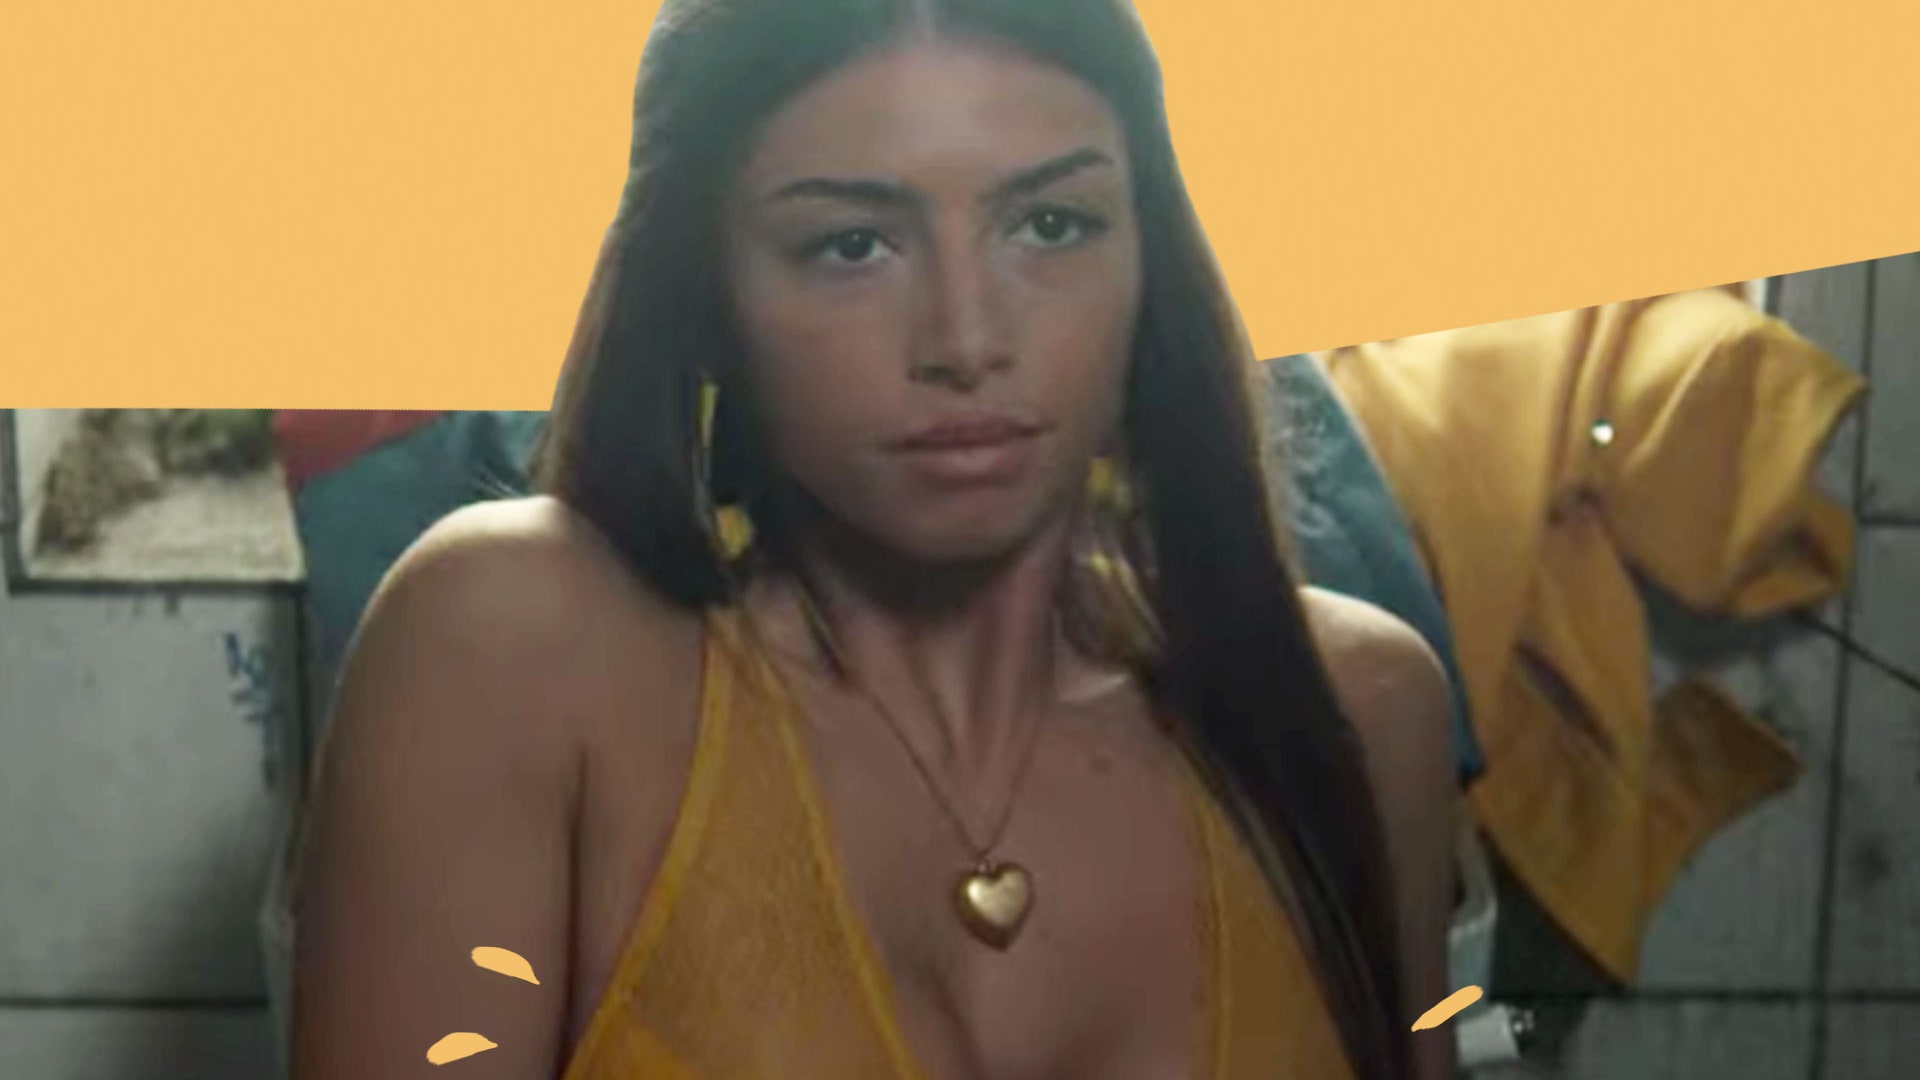 Where To Buy Ruby's Yellow Bra from Sex Education